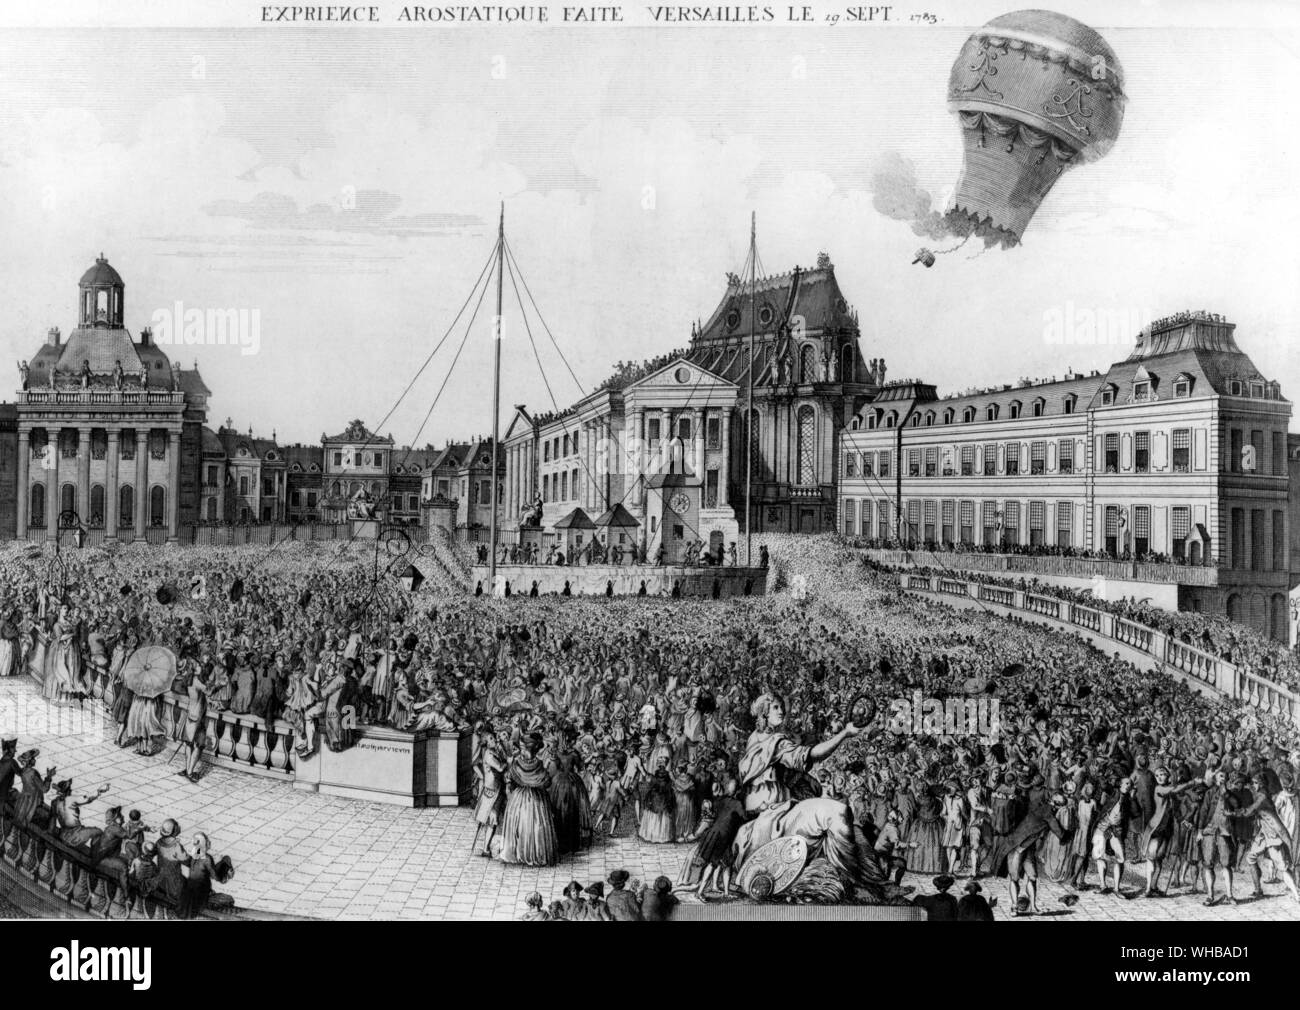 Versailles : Experience Aerostatique - showing the balloon carrying the animals rising above the crowded square. 19 September 1783 Stock Photo